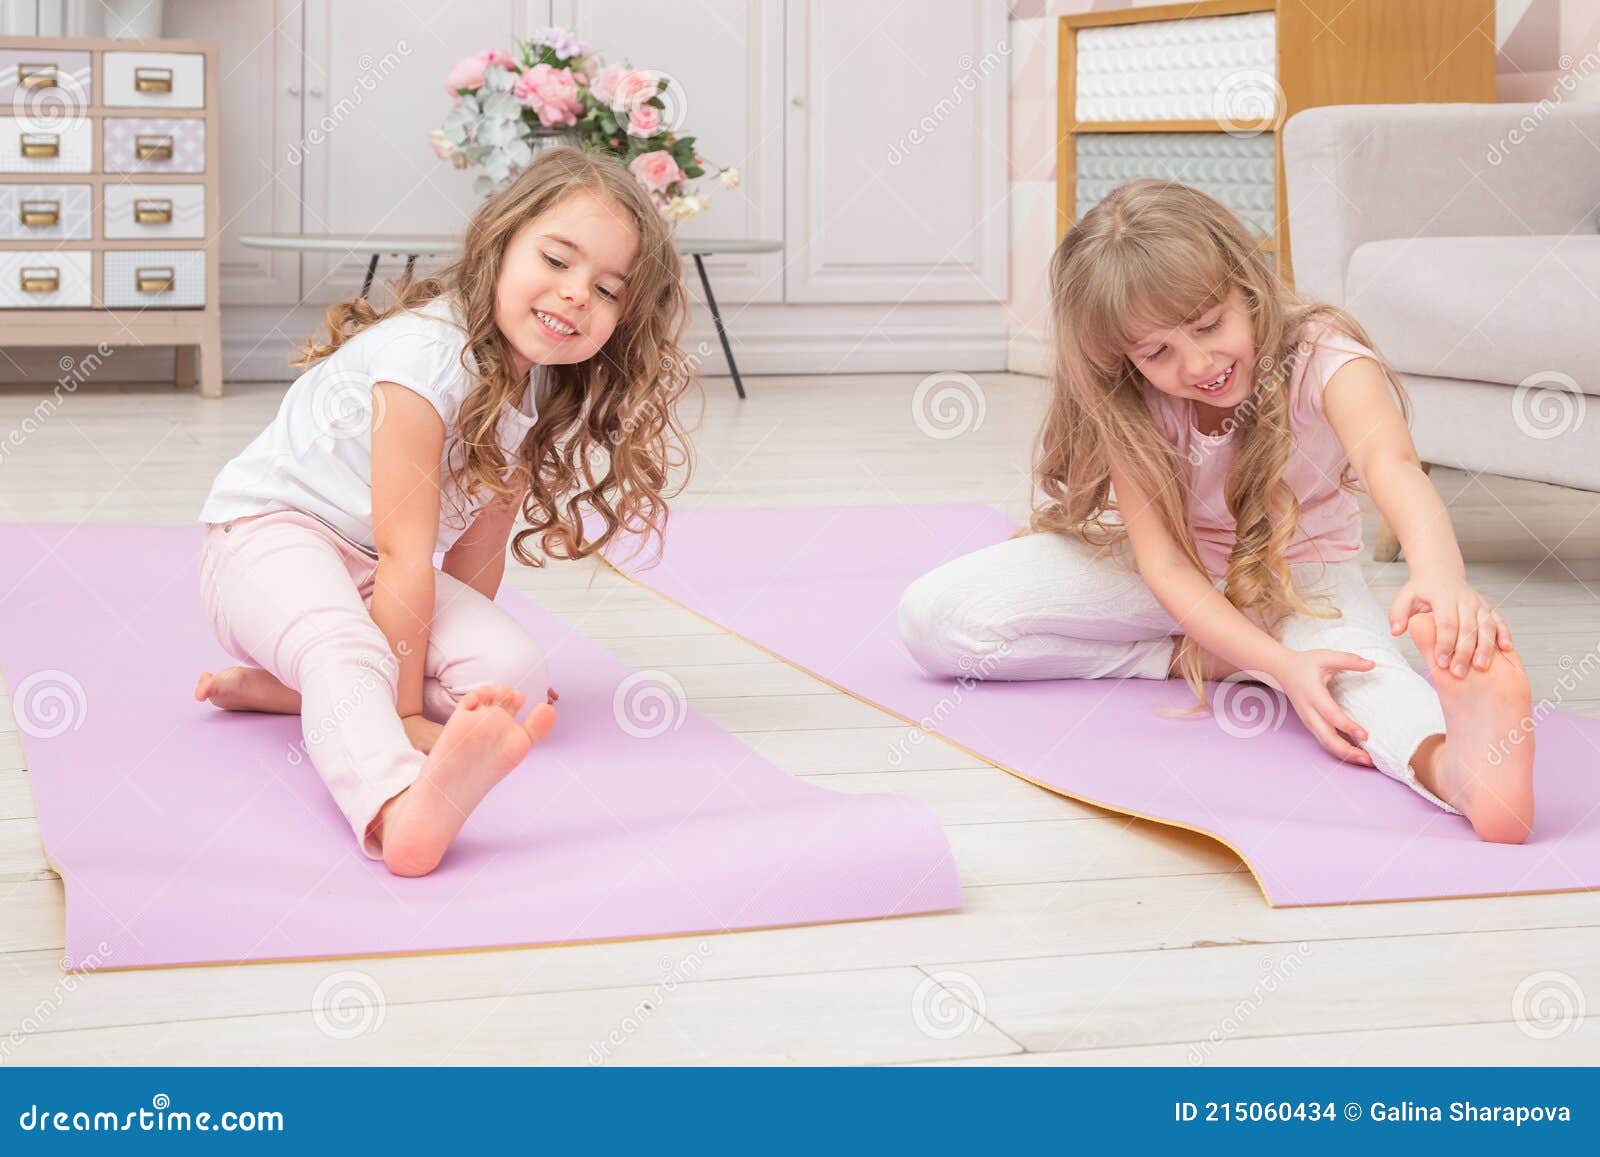 Full Length Front View Smiling Cute Girls Sitting on on Yoga Mat Stock  Photo - Image of comfort, girls: 215060434